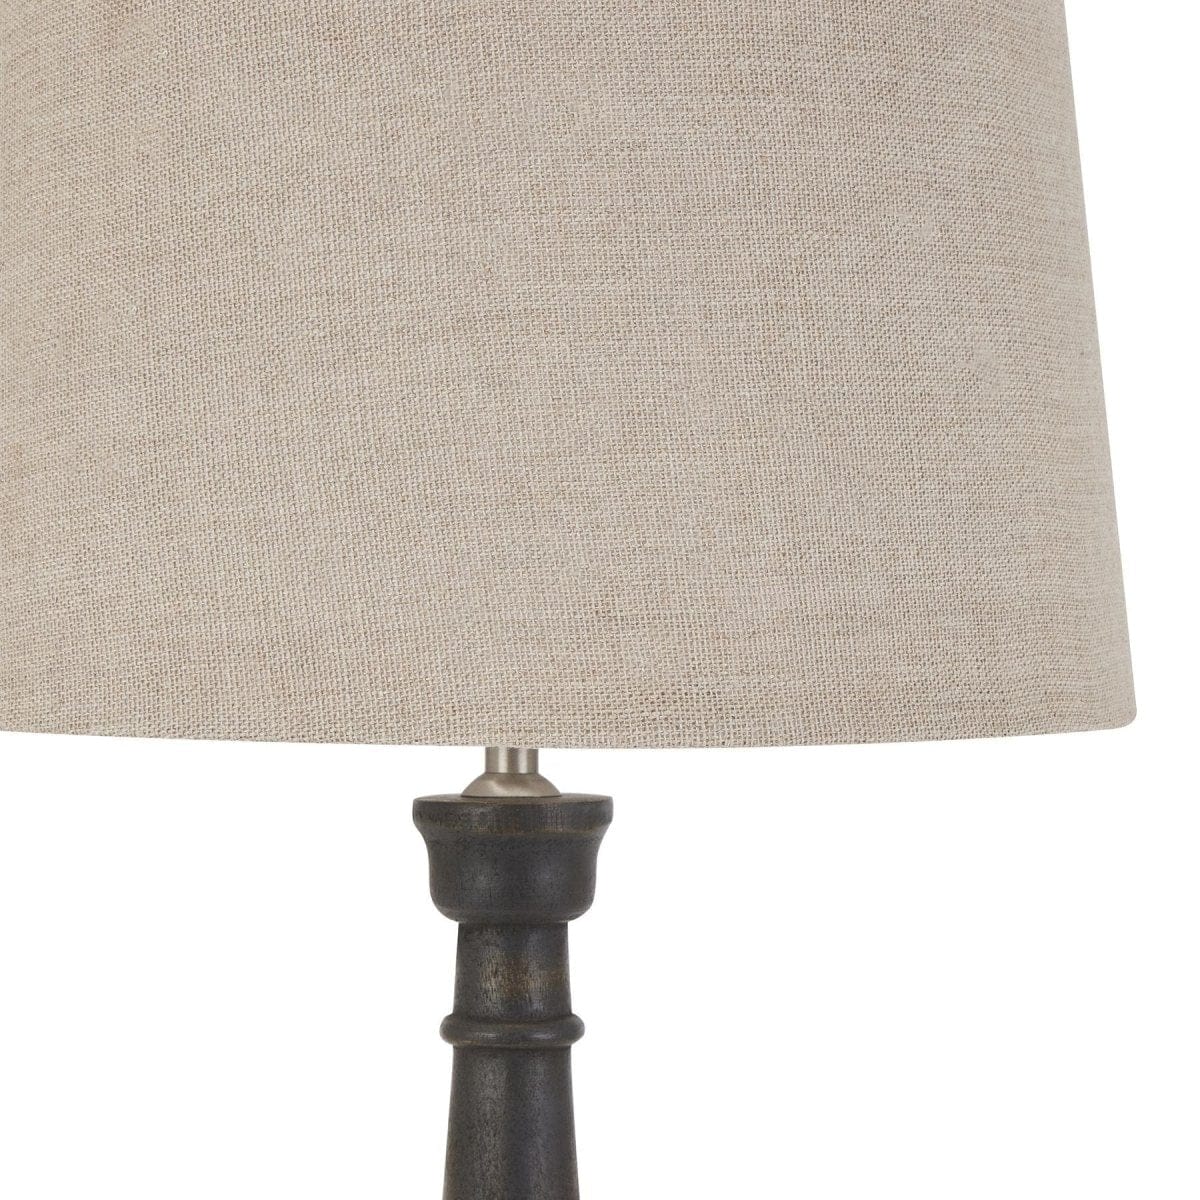 Hill Interiors Table lamp Delaney Grey Bead Candlestick Table Lamp with Linen Shade